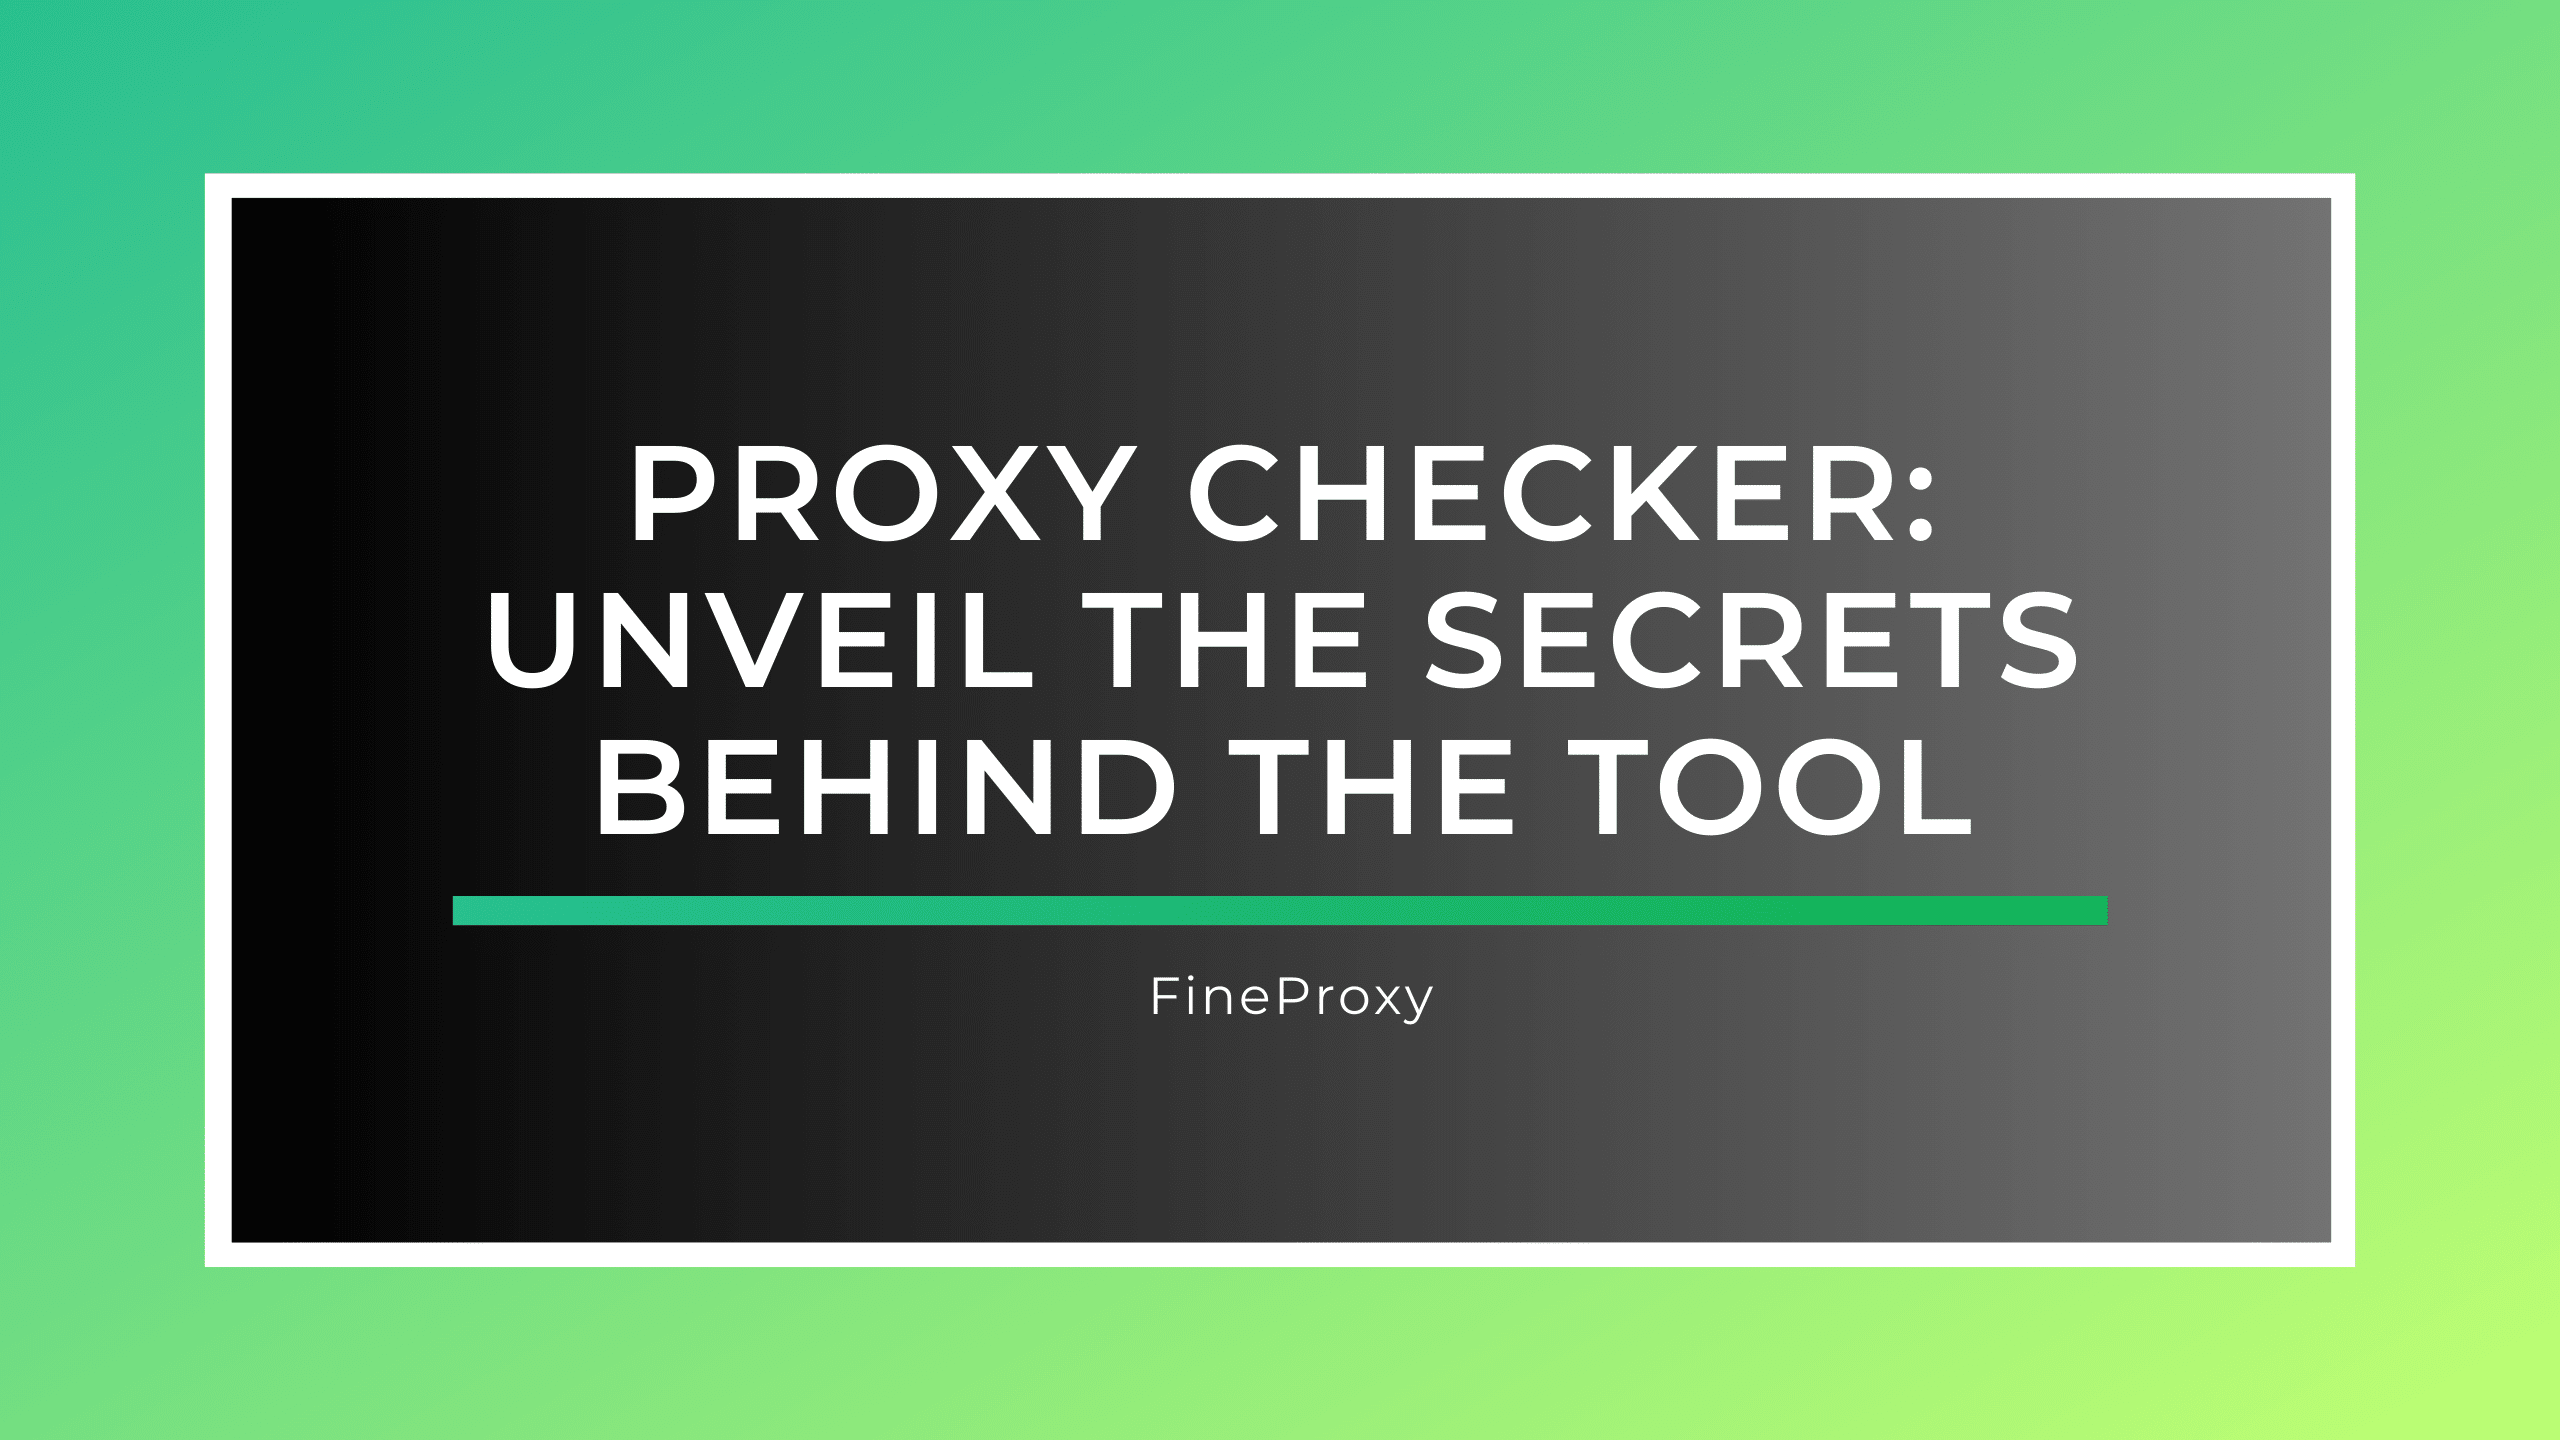 Proxy Checker: Unveil the Secrets Behind the Tool